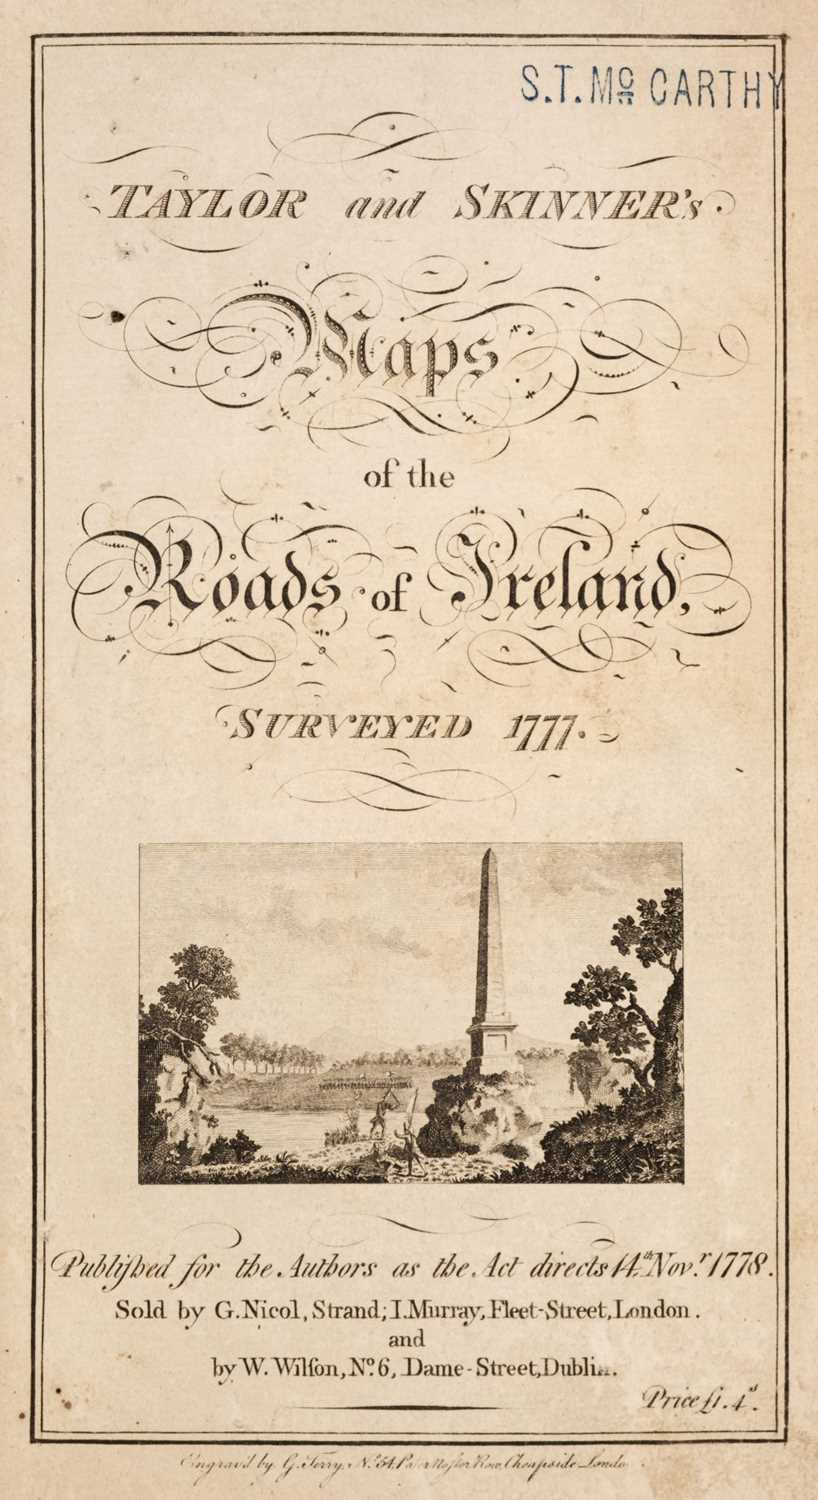 Lot 54 - Taylor (George) & Skinner (Andrew). Maps of the Roads of Ireland, London: For the Author, 1778